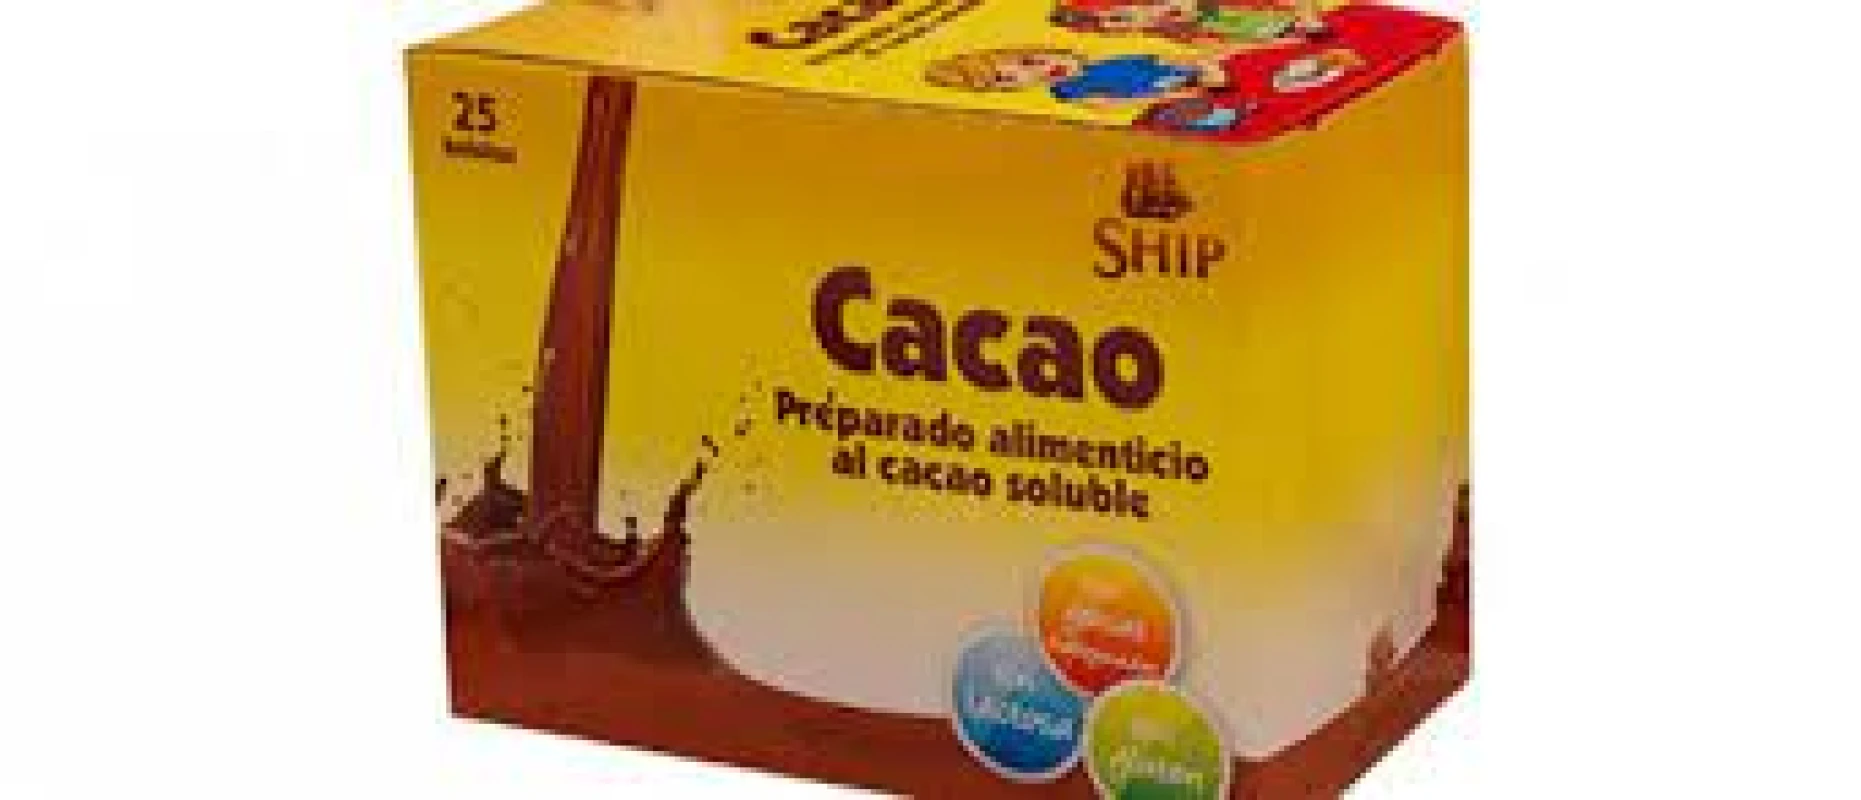 CACAO SOLUBLE 18GR C/100 SOBRES P/C SHIP